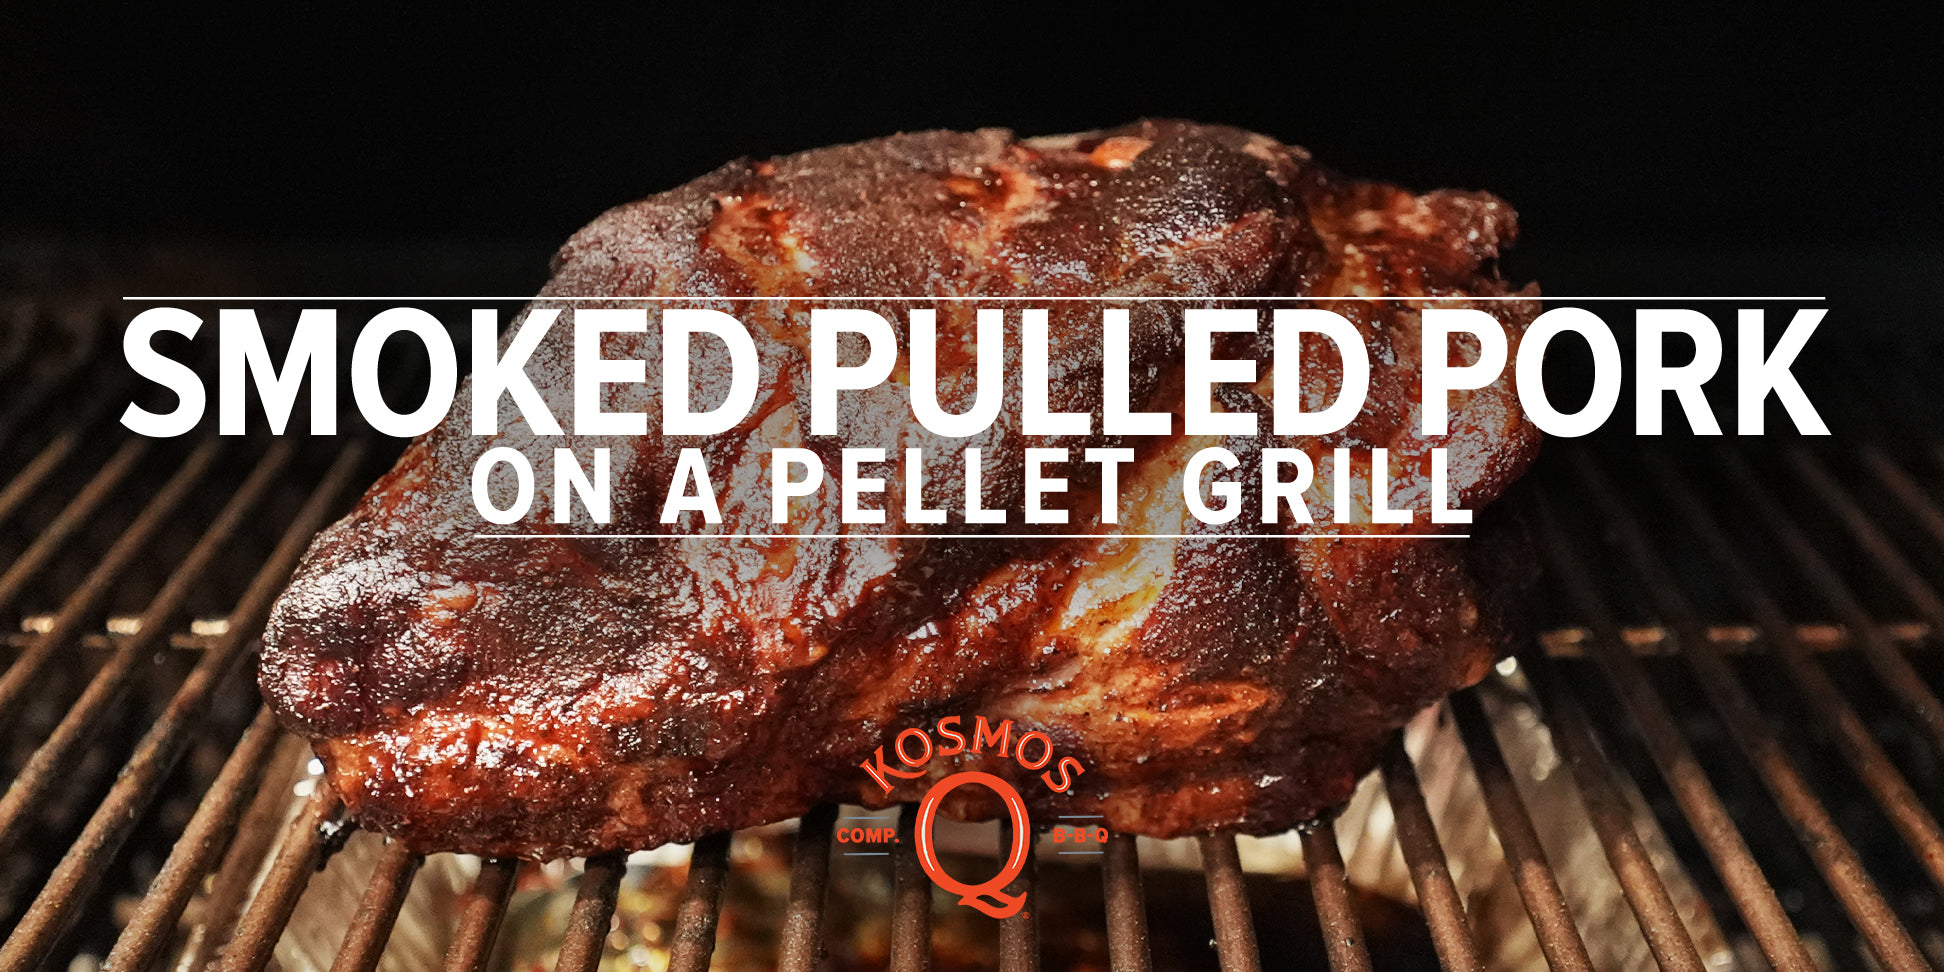 How to Smoke Pulled Pork on a Pellet Grill